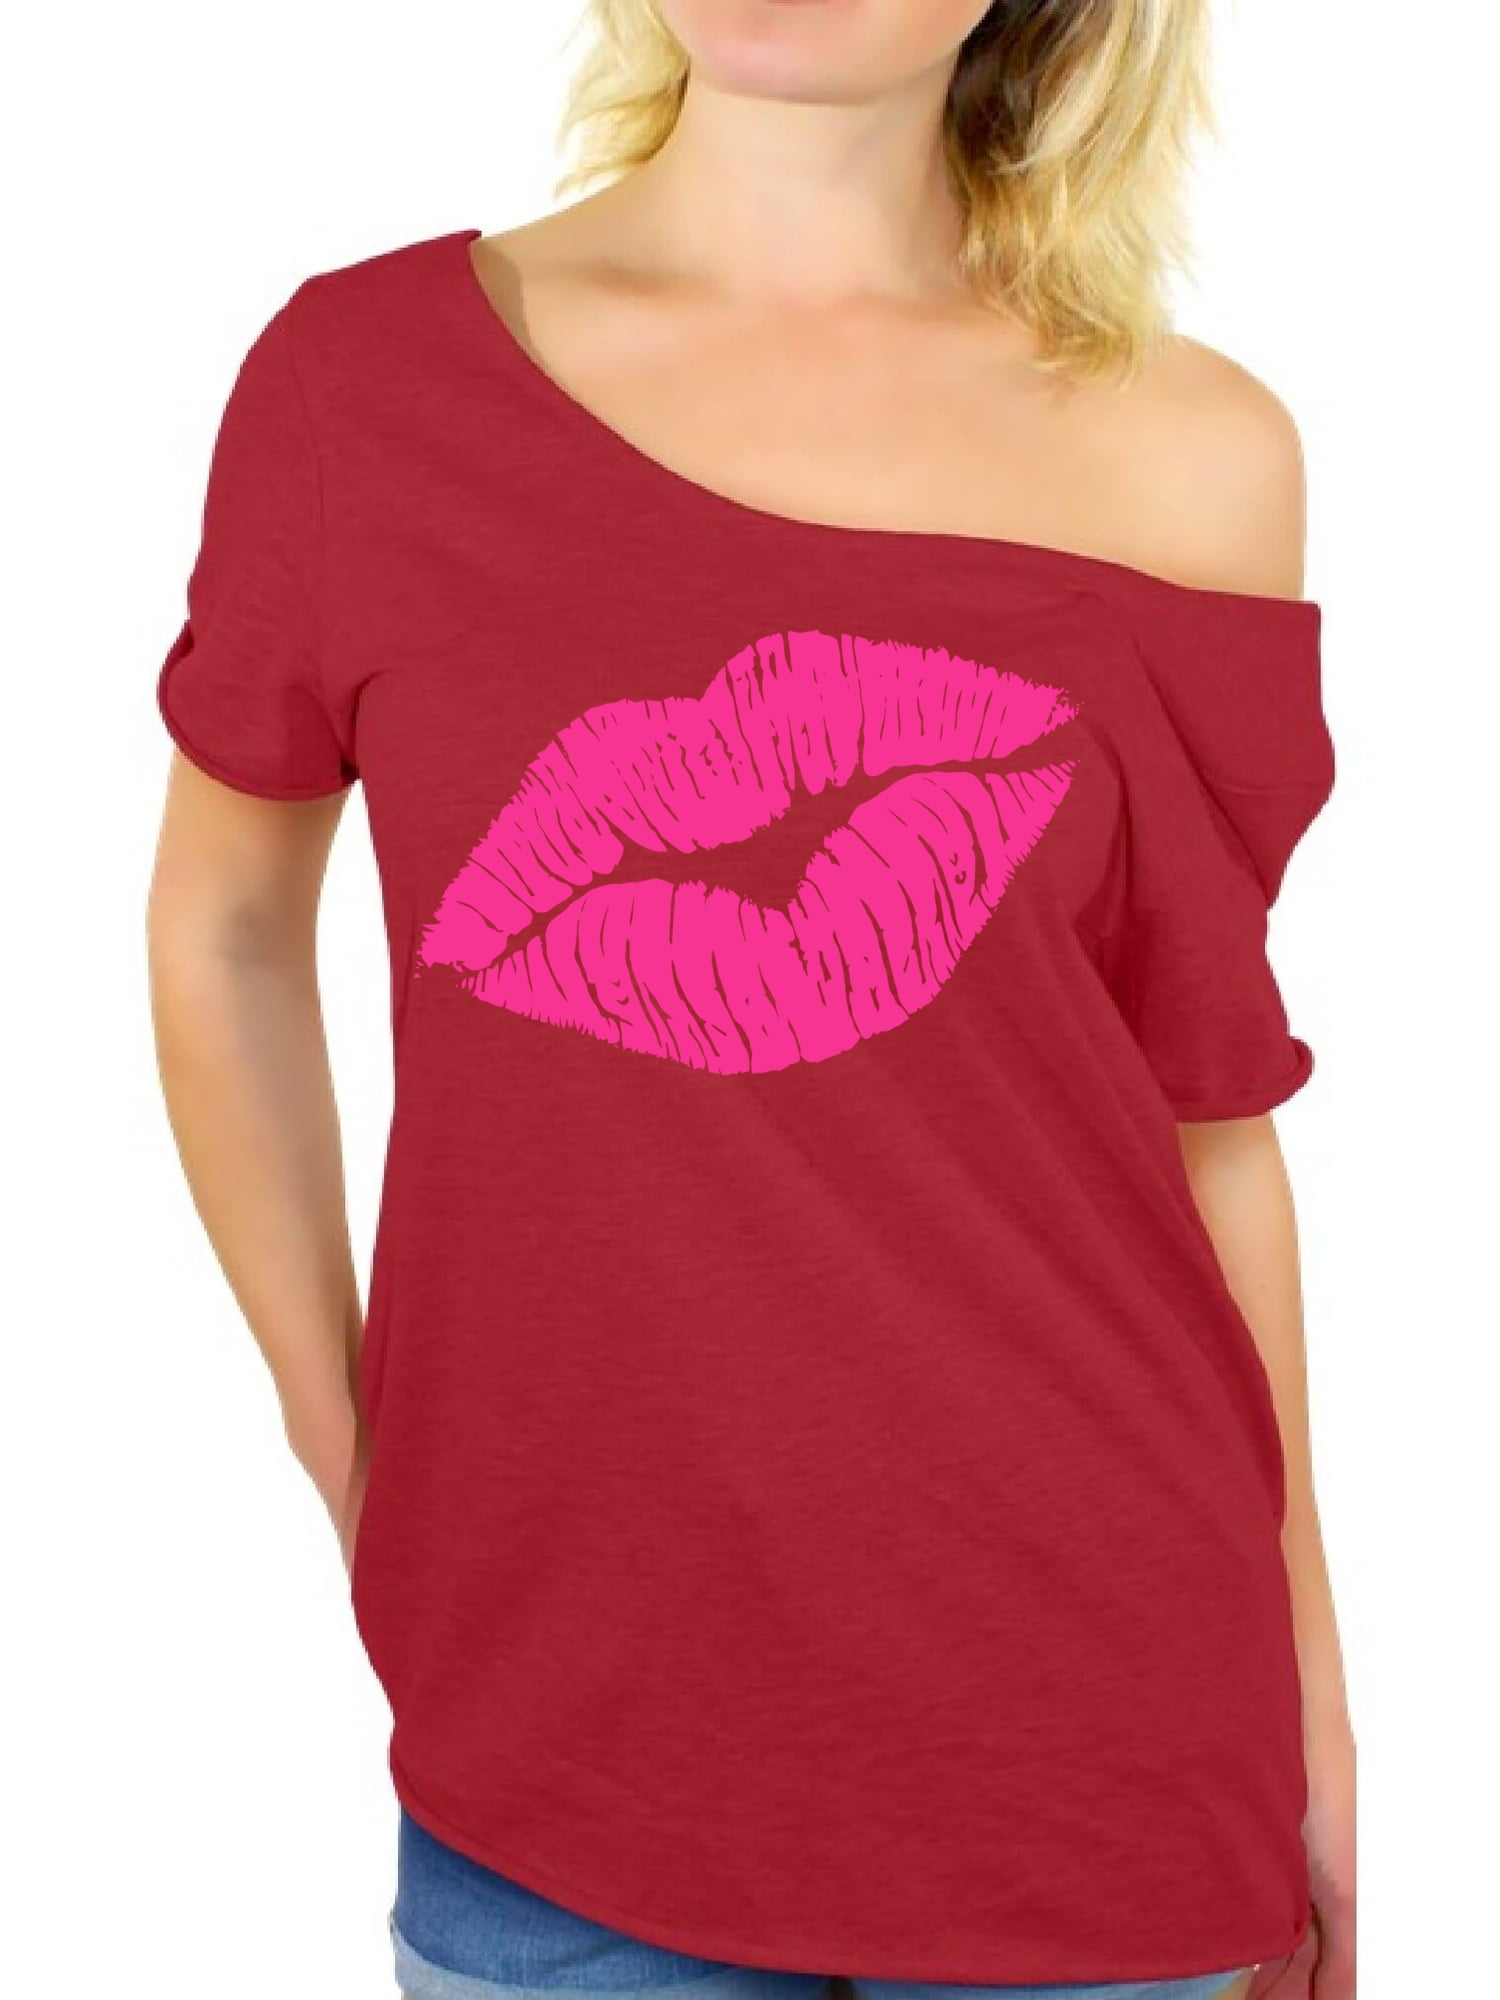 Awkward Styles Pink Lips Shirt Retro 80s Neon Lips T Shirt 80s Shirt Off  the Shoulder 80s Accessories 80s Rock T Shirt 80s T Shirt 80s Costume 80s  Clothes for Women 80s Outfit 80s Party Girl Shirt